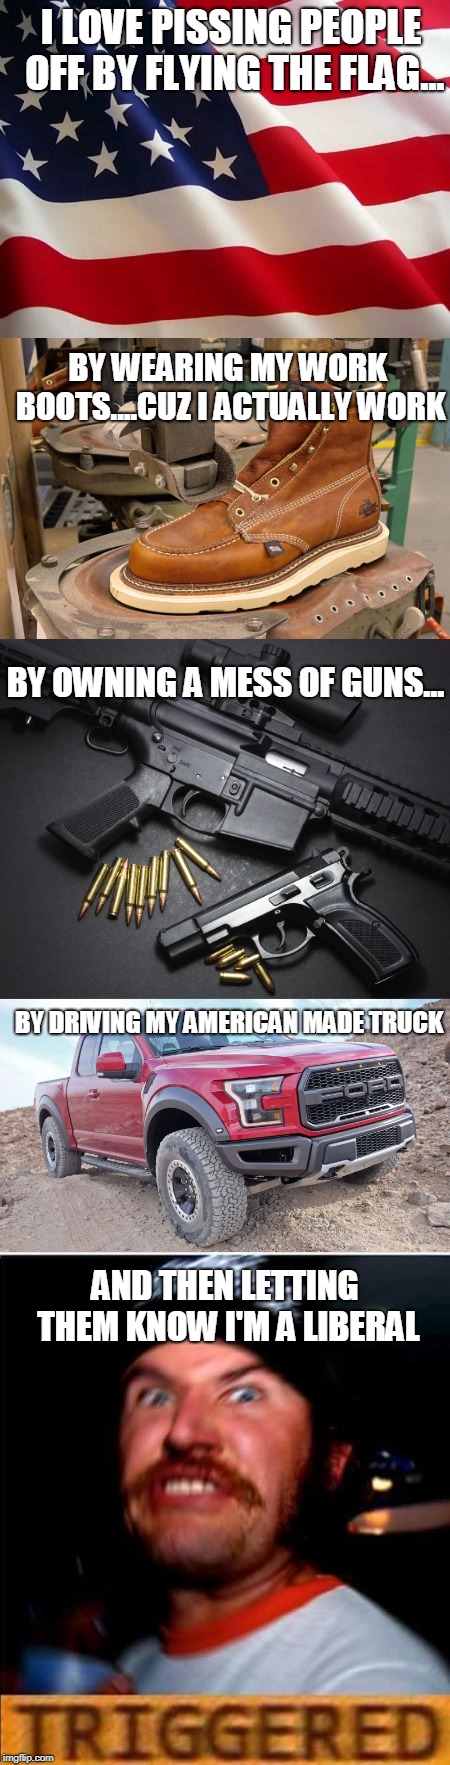 It's fun | I LOVE PISSING PEOPLE OFF BY FLYING THE FLAG... BY WEARING MY WORK BOOTS....CUZ I ACTUALLY WORK; BY OWNING A MESS OF GUNS... BY DRIVING MY AMERICAN MADE TRUCK; AND THEN LETTING THEM KNOW I'M A LIBERAL | image tagged in liberals,conservatives,triggered | made w/ Imgflip meme maker